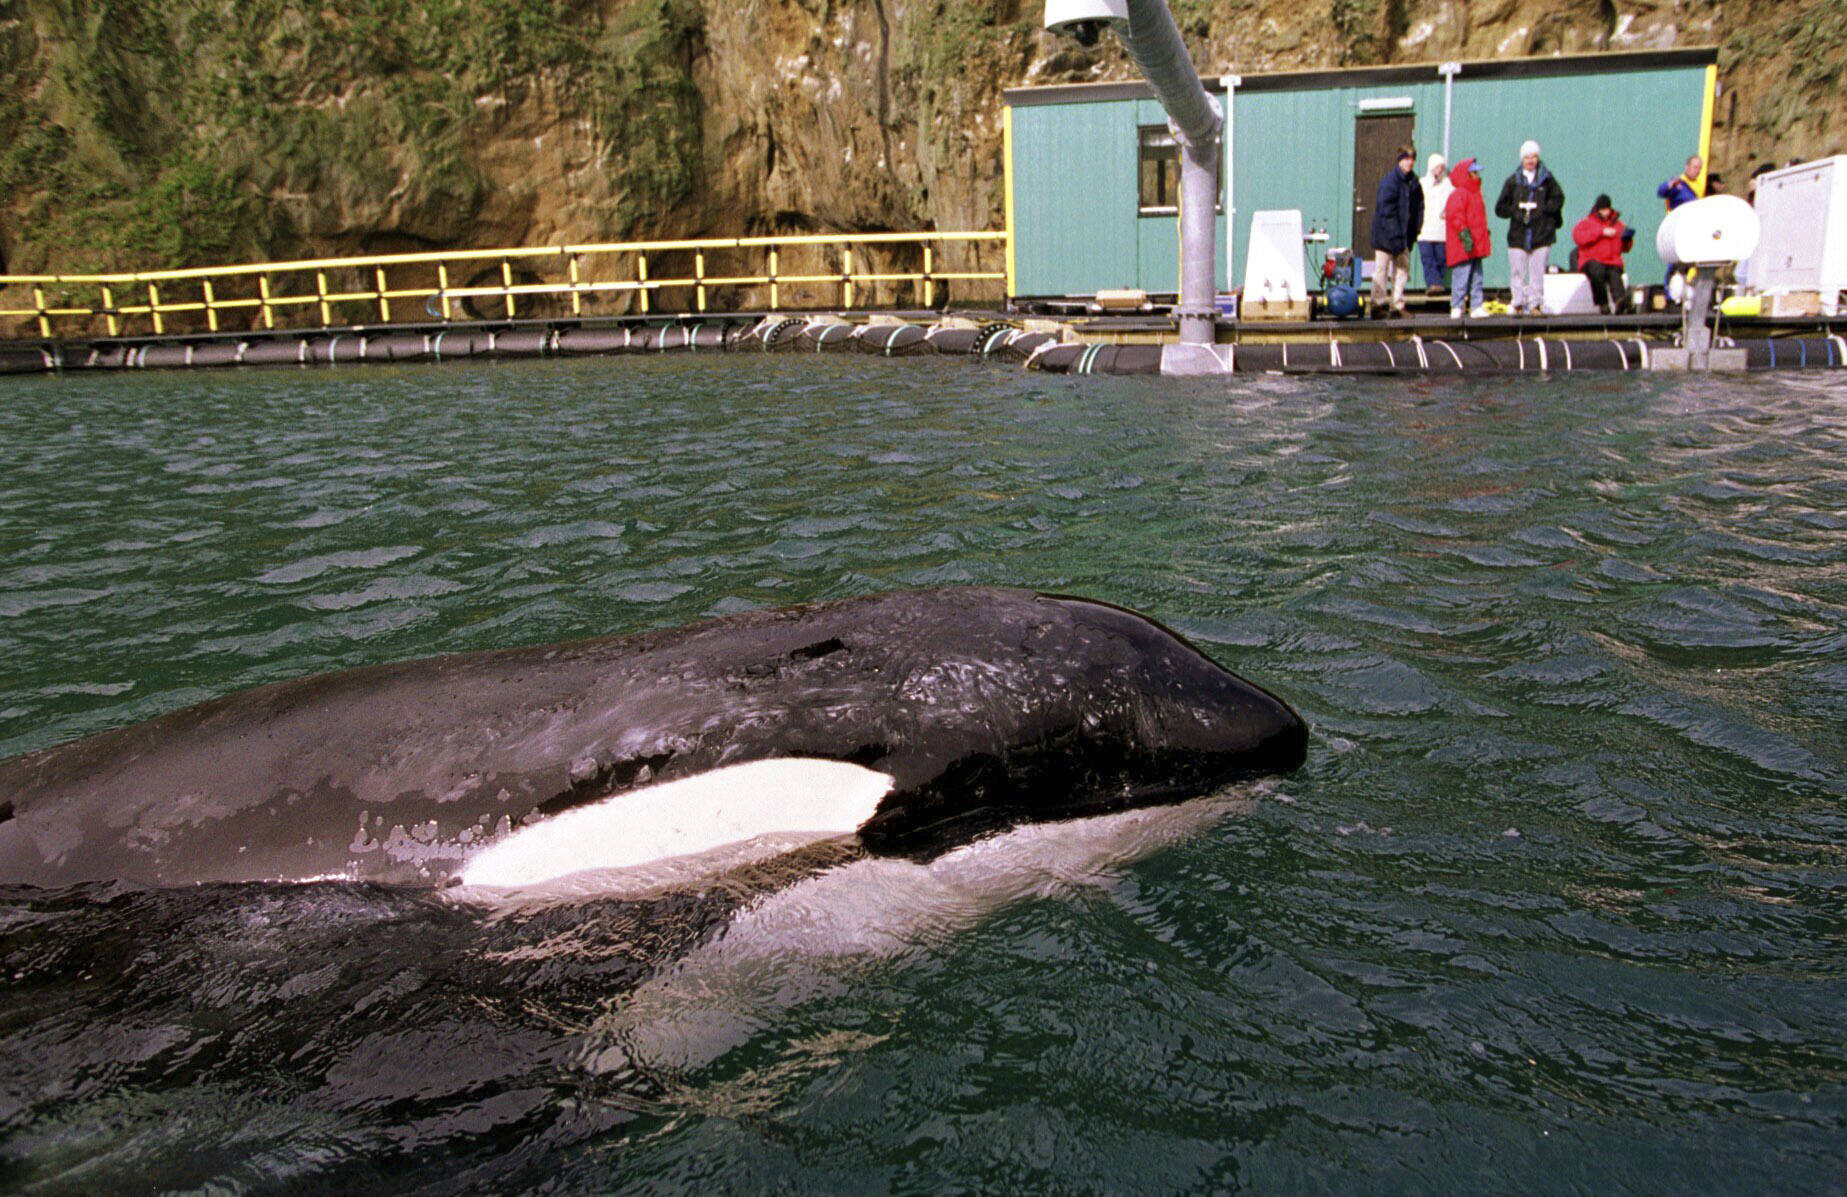 Keiko, the star of the movie “Free Willy,” swims in his new sea pen at Heimaey, Iceland, on Sept. 11, 1998. An ambitious plan announced last week to return a killer whale, held captive for more than a half-century, to her home waters in Washington’s Puget Sound thrilled those who have long advocated for her to be freed from her tank at the Miami Seaquarium. But it also called to mind the release of Keiko, who failed to adapt to the wild after being returned to his native Iceland and died five years later. (AP Photo / Don Ryan)